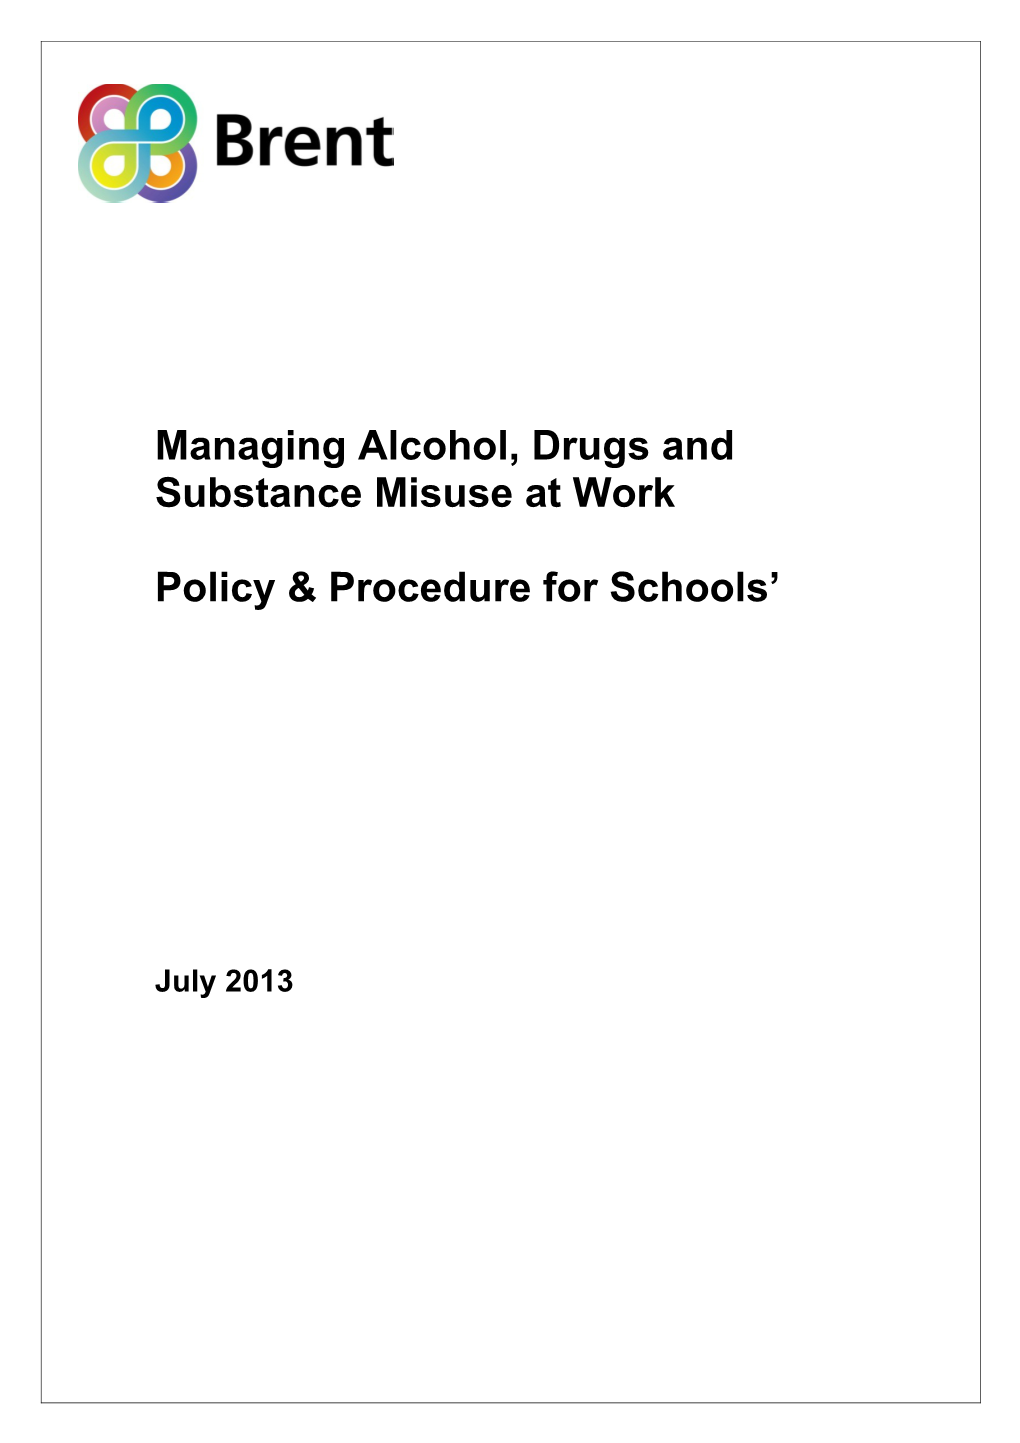 Managing Alcohol, Drugs and Substance Misuse at Work